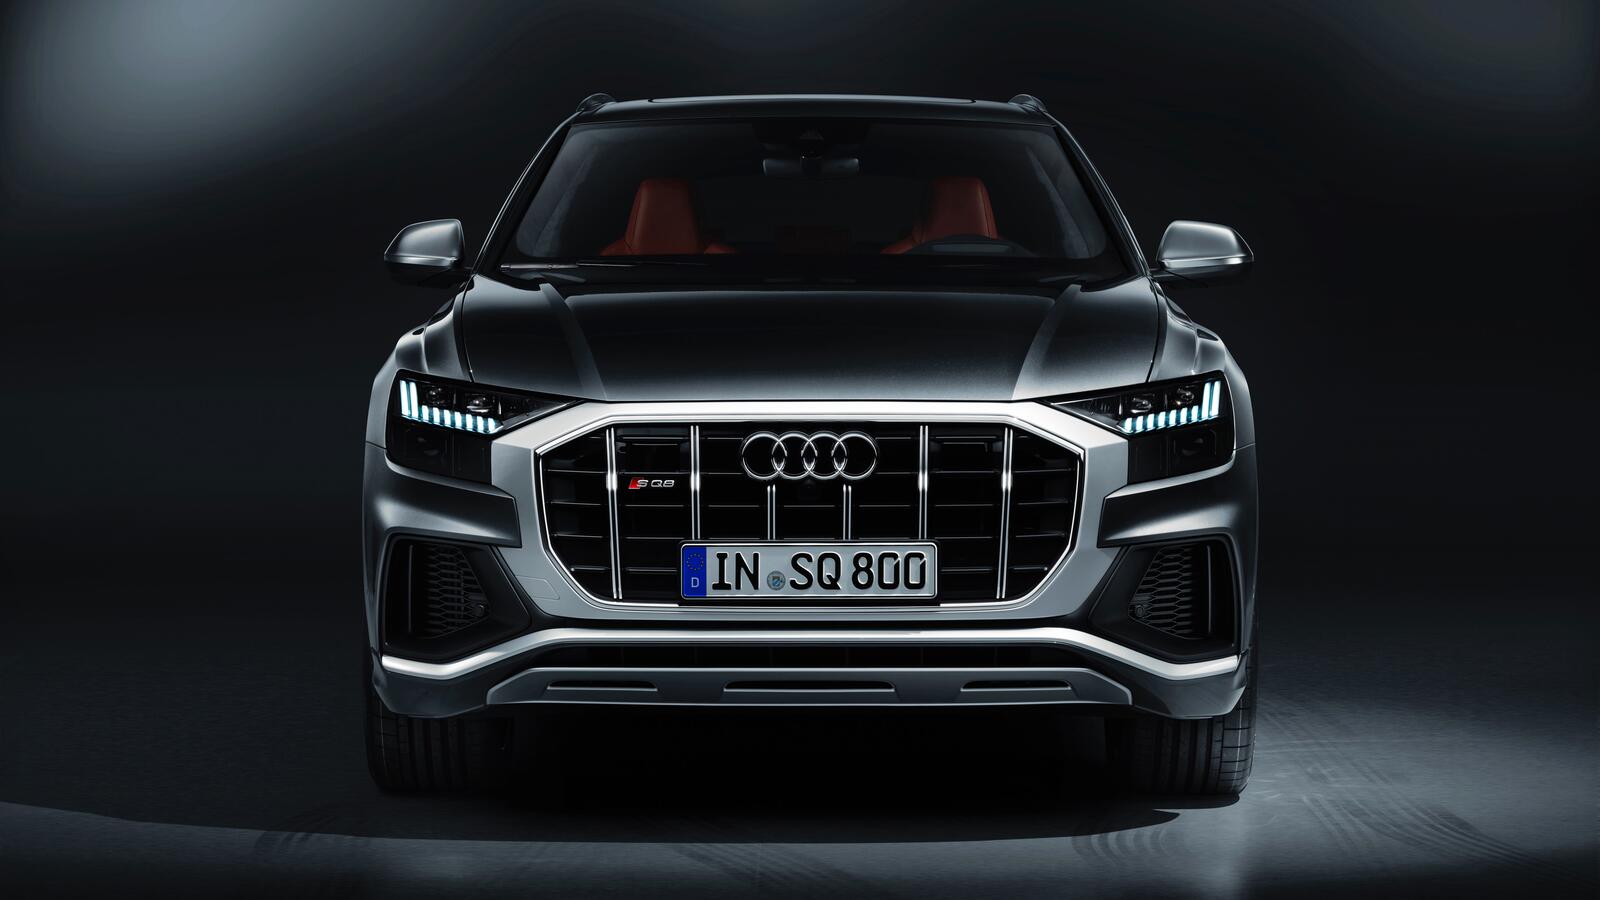 Wallpapers Audi sq8 sedan view from front luxury cars on the desktop